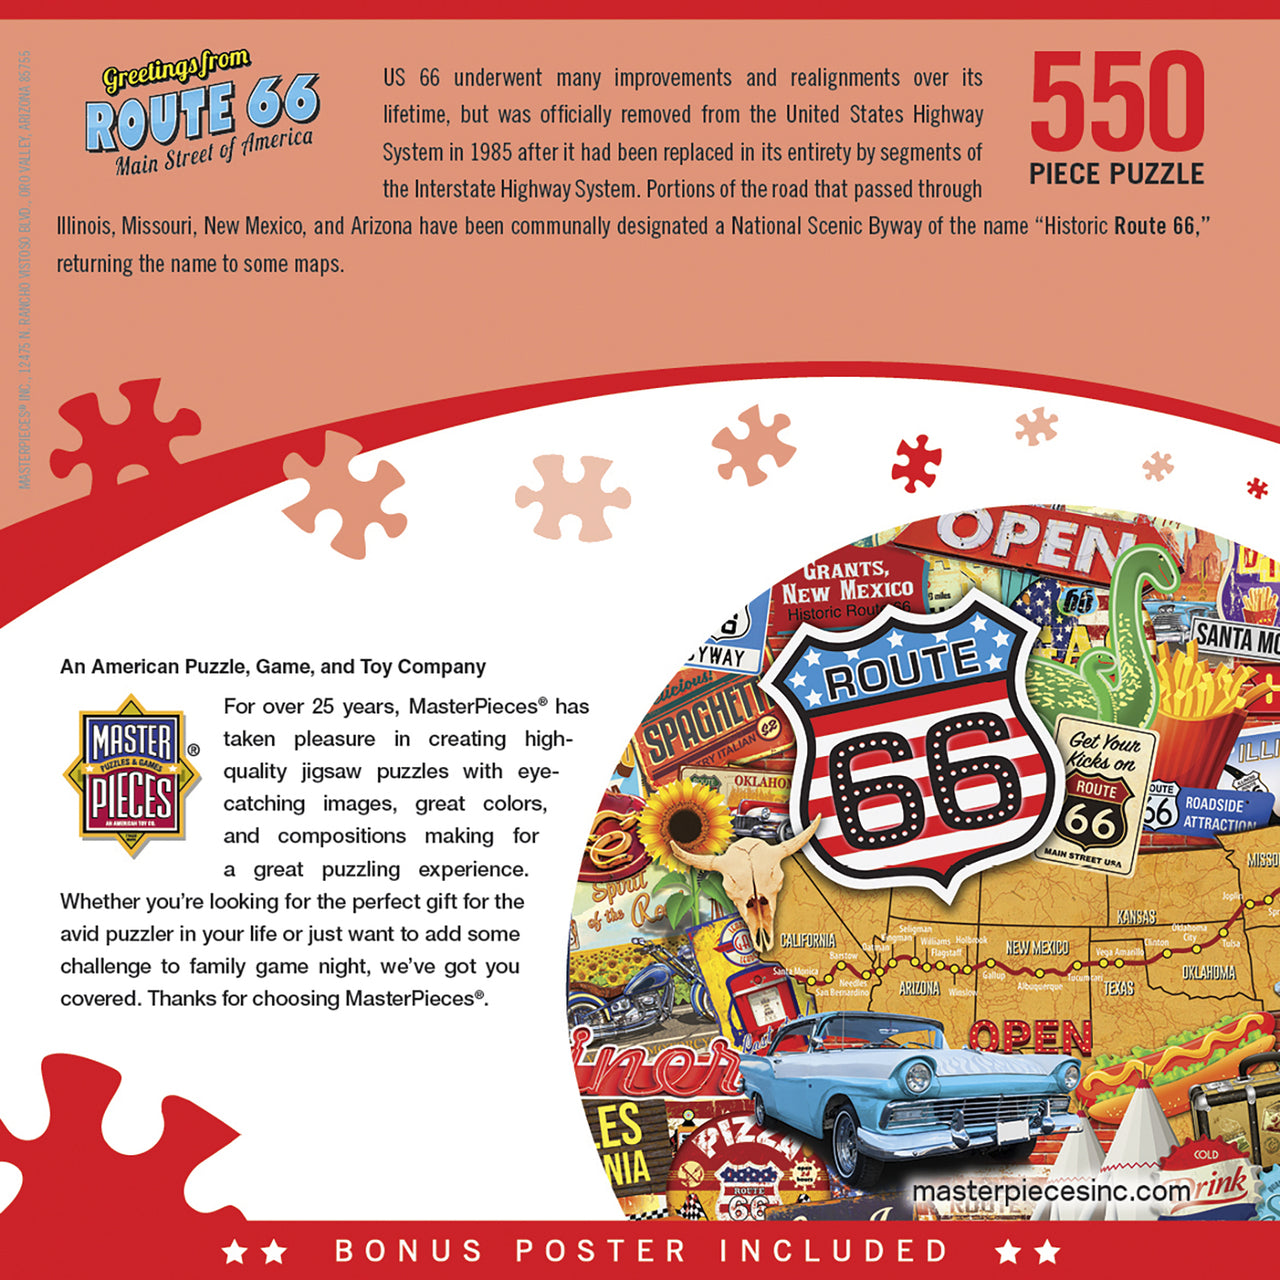 Travel Collages - Route 66 - 550 Piece Jigsaw Puzzle by Masterpieces